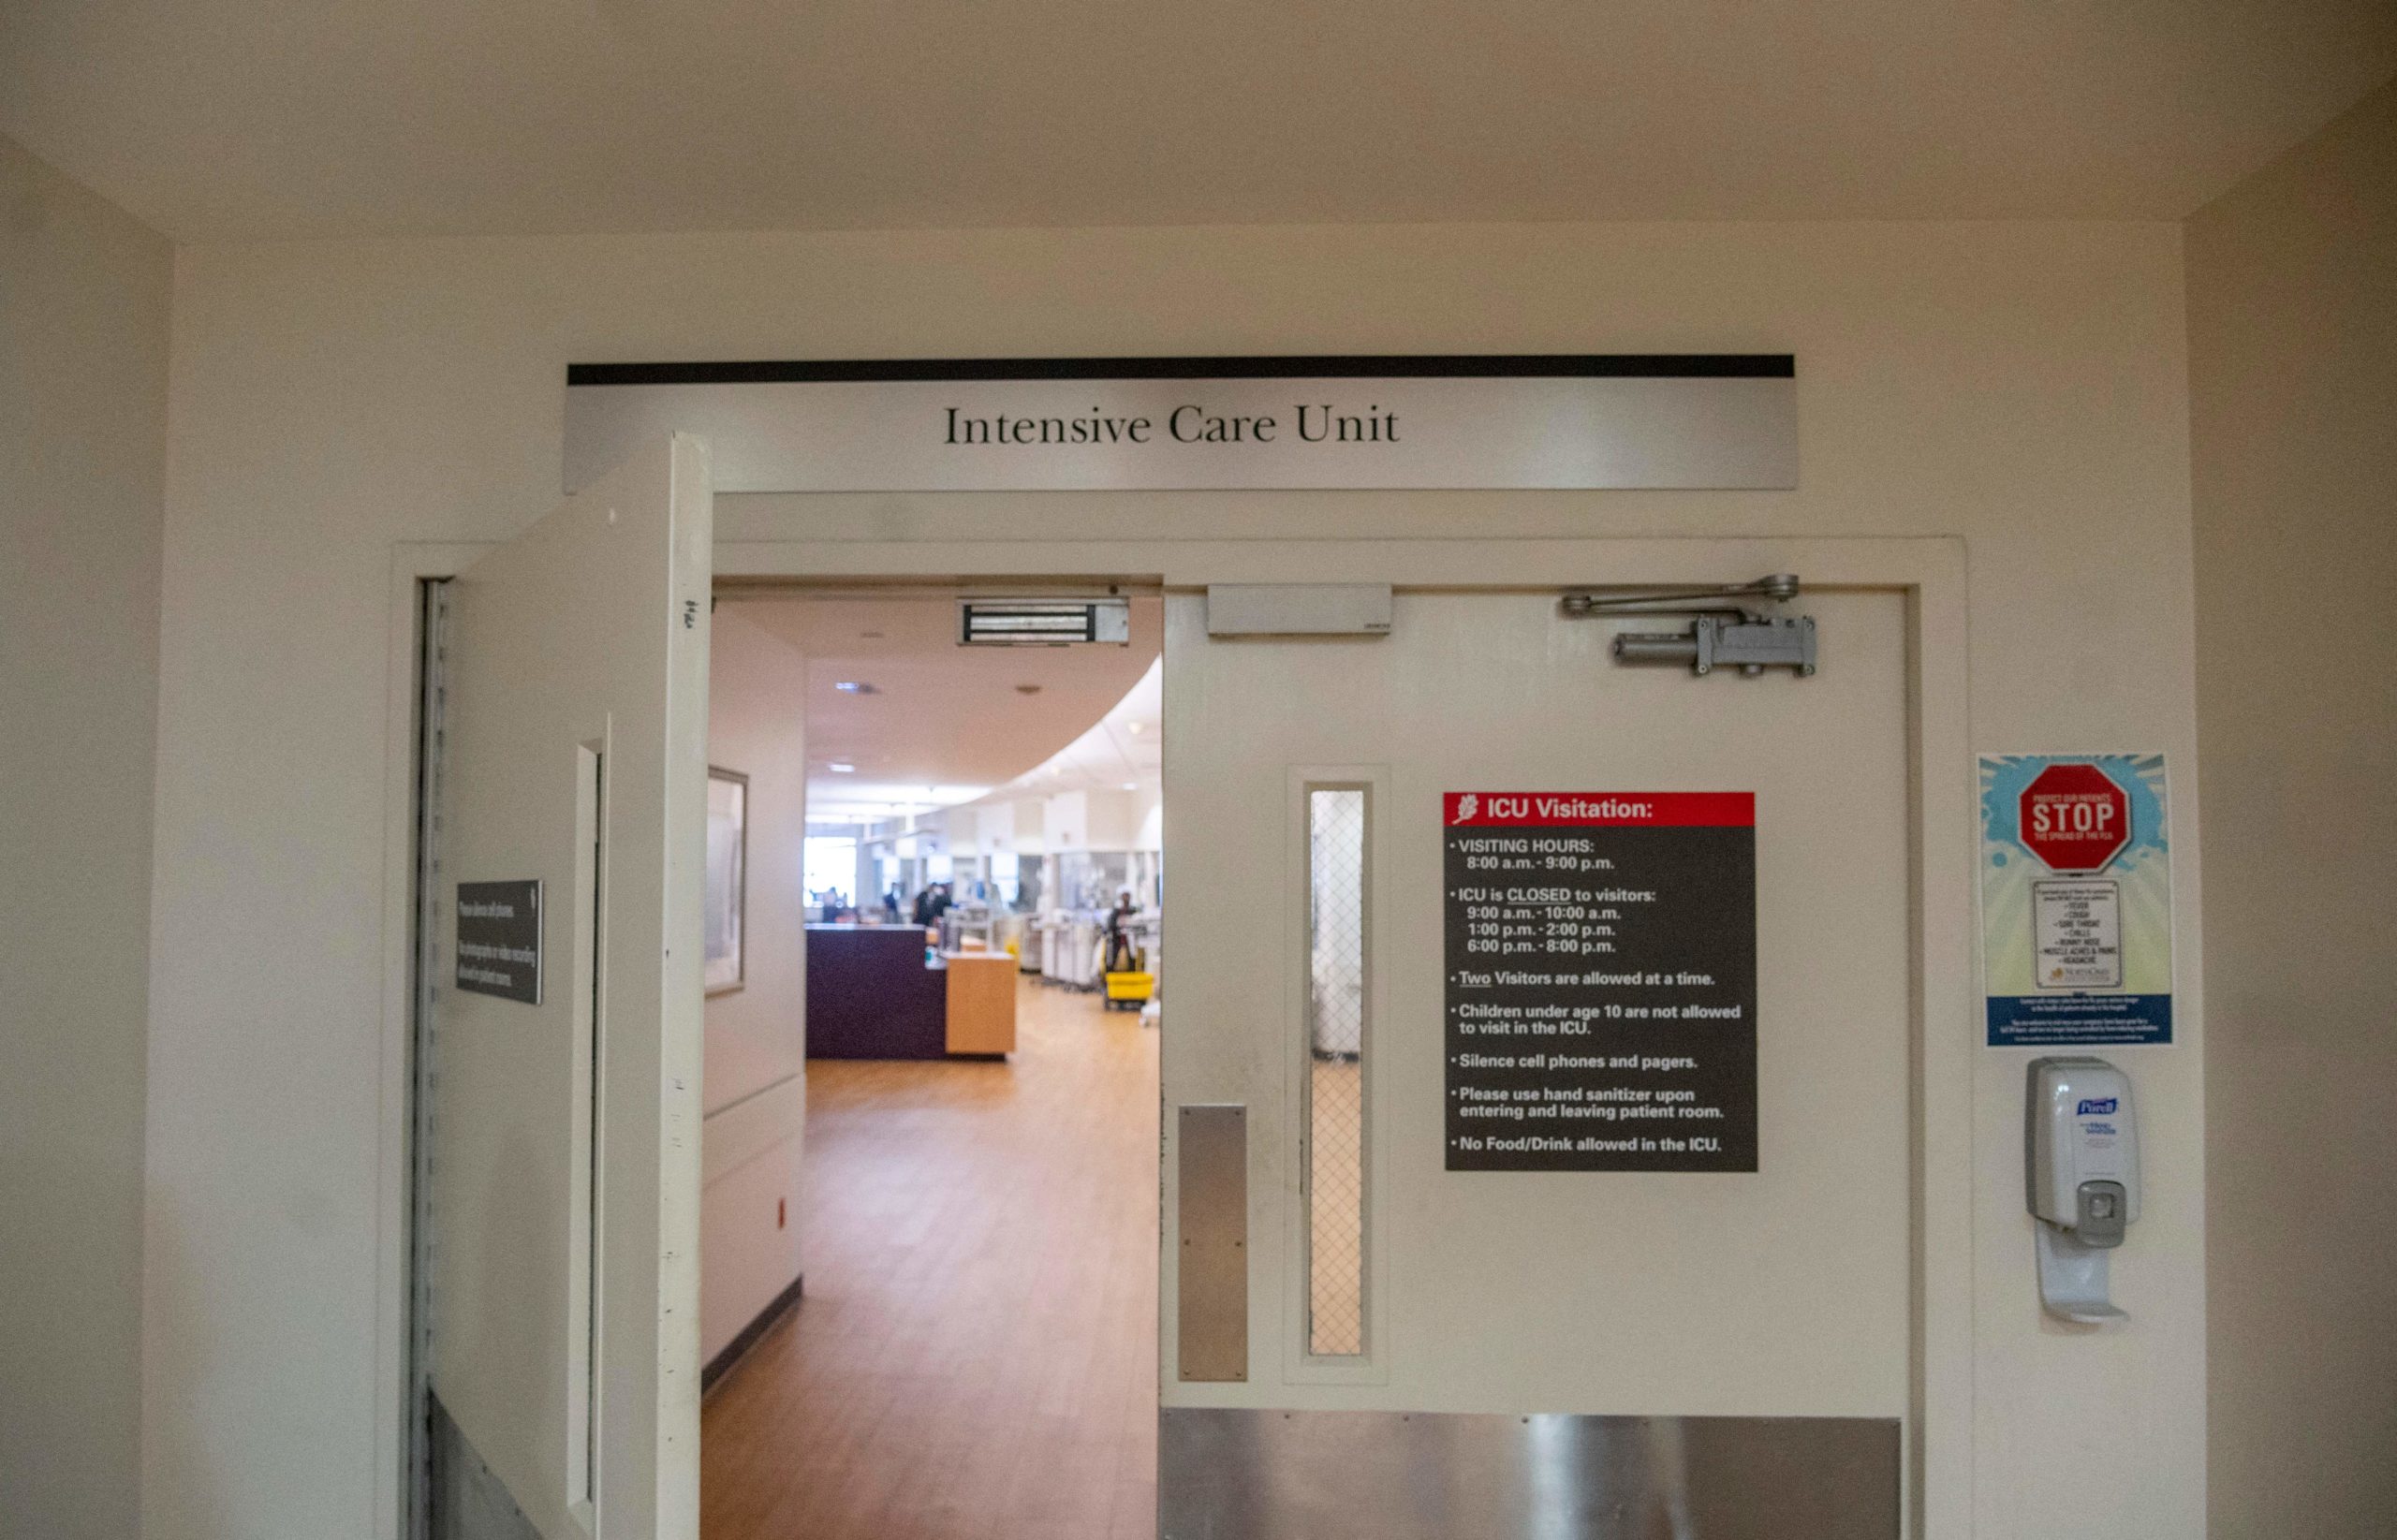 The entrance of the Intensive Care Unit inside in North Oaks Hospital is seen in Hammond, Louisiana, on August 13, 2021. - Barely clinging to life, patients in an intensive care unit in Hammond, Louisiana, lie in their beds, gray and emaciated, their faces marked by the tight grip of respirators and the ravages of Covid-19. As cases soar due to the more contagious Delta variant, medical units like the North Oaks Hospital are overwhelmed. Half of the Covid patients there are critical. (Photo by EMILY KASK/AFP via Getty Images)